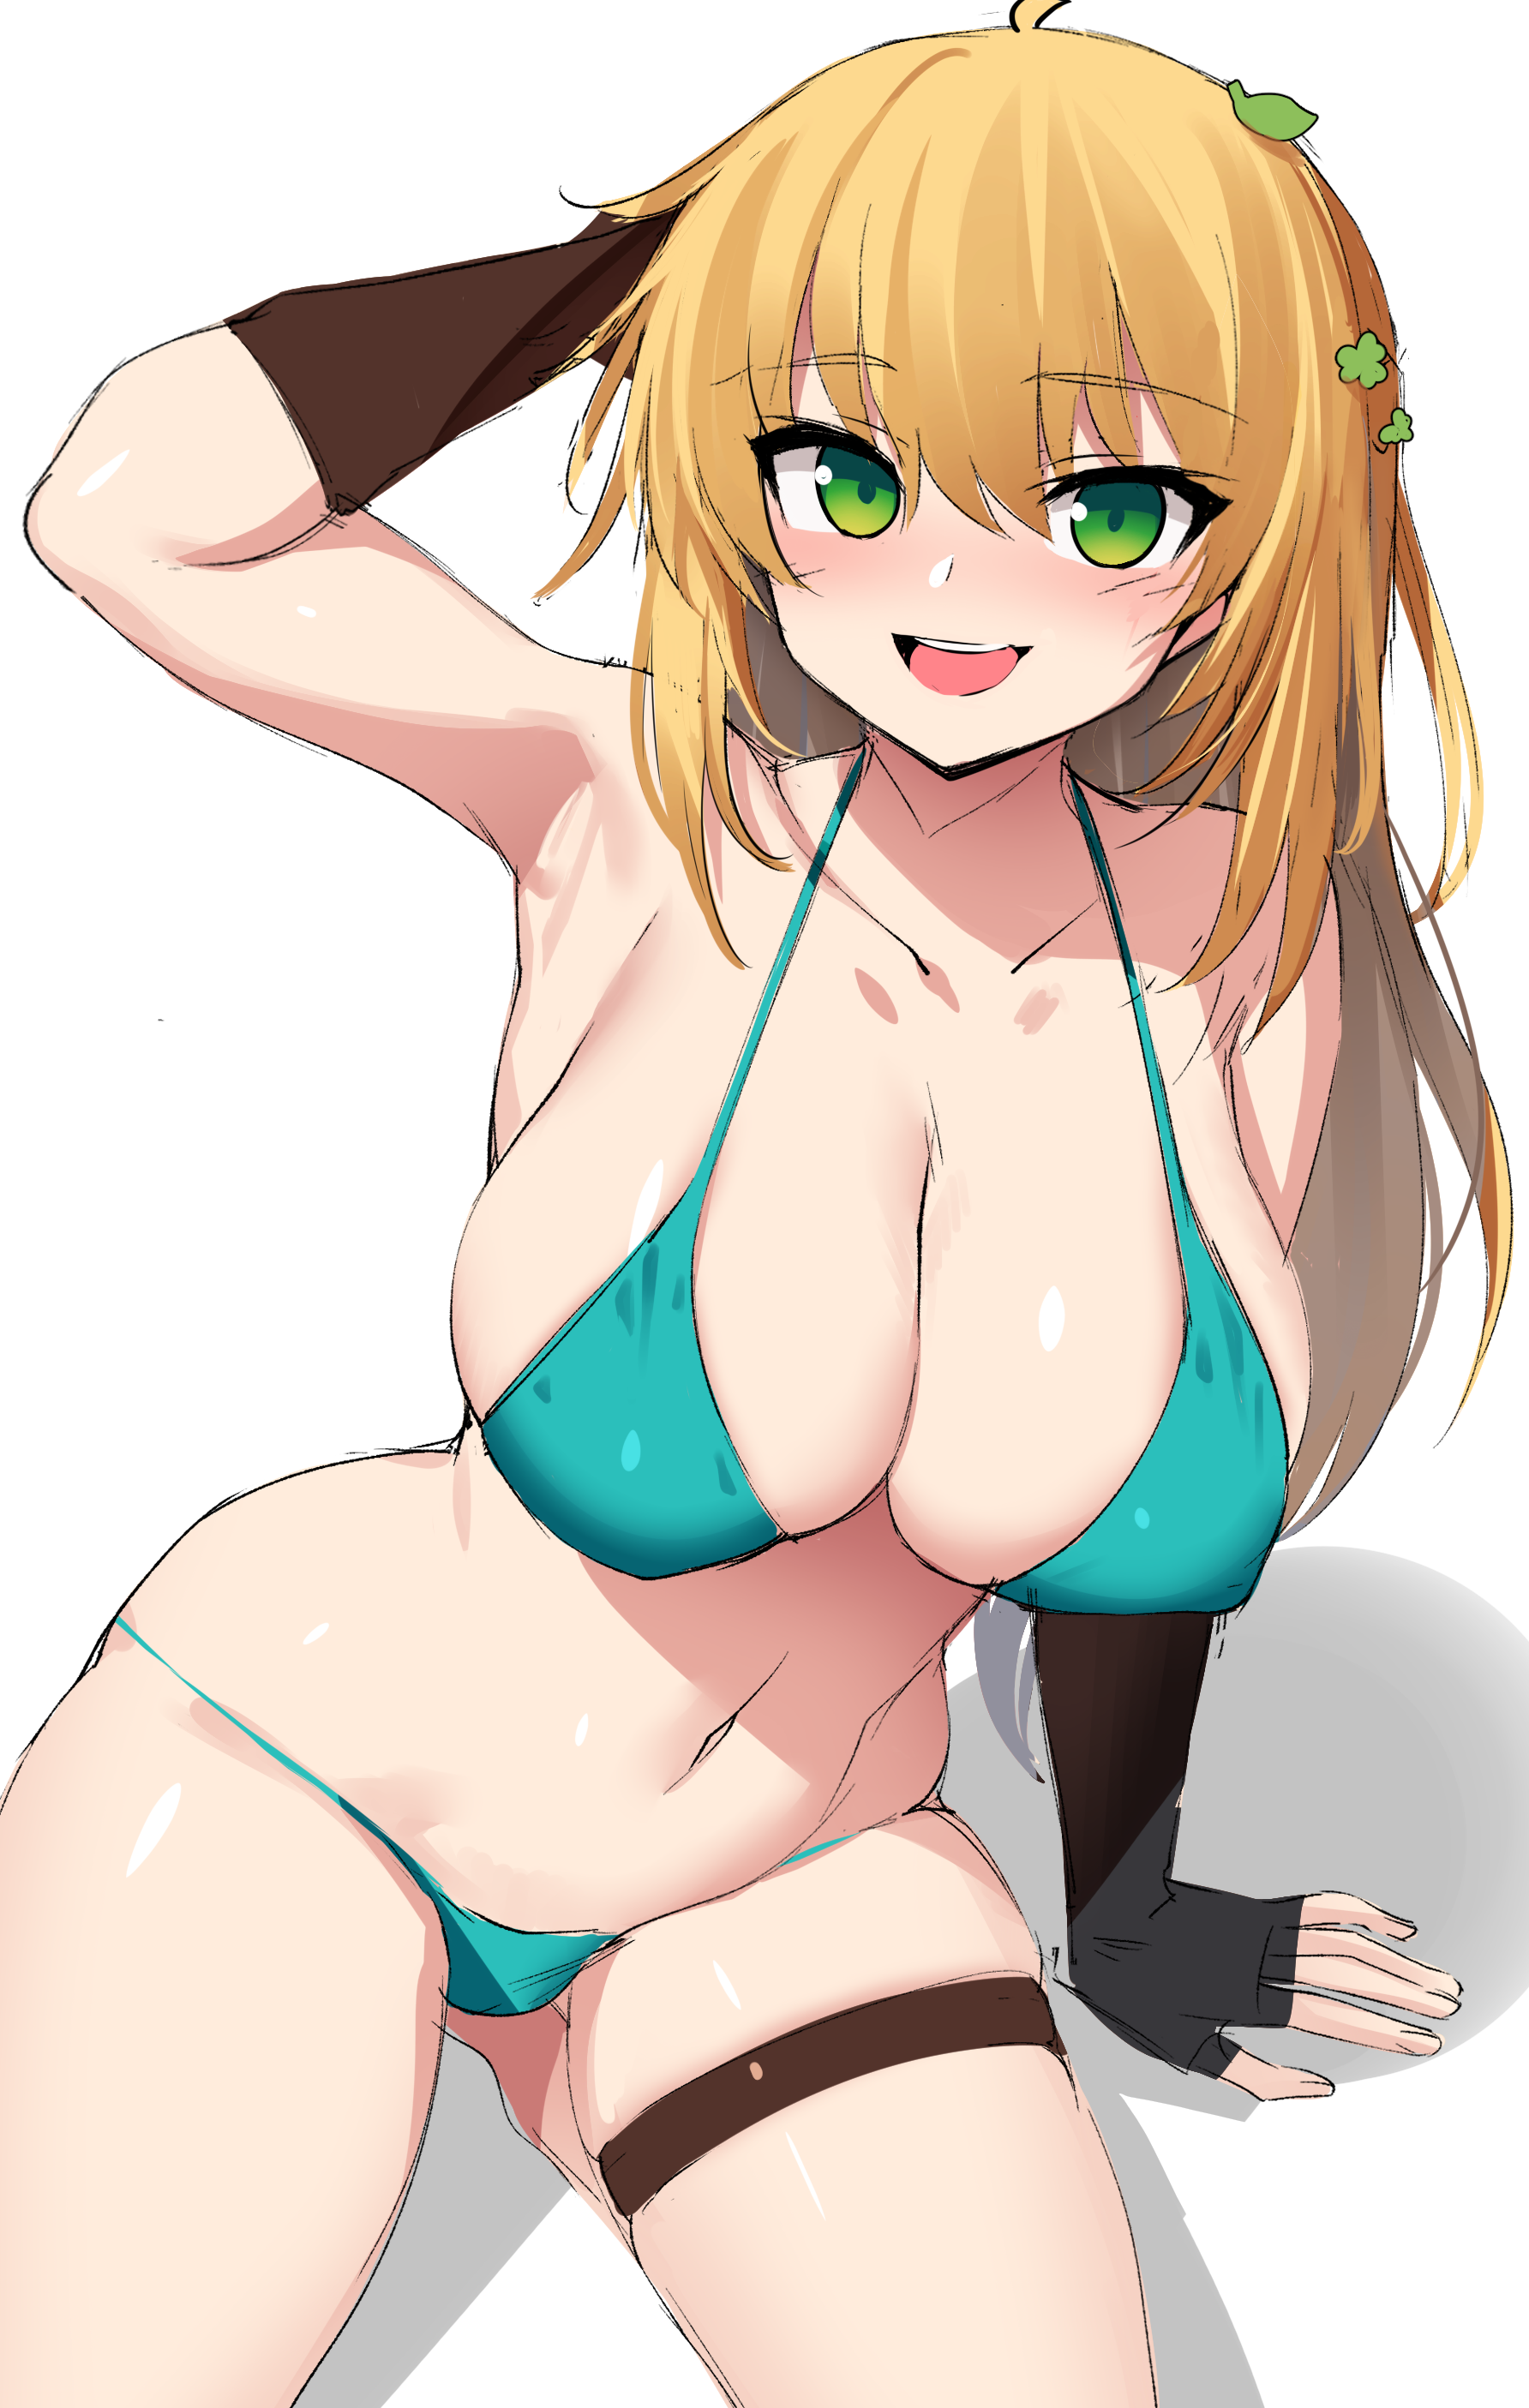 Anime 1784x2810 Guardian Tales video game girls anime girls blonde belly bikini white background Future Knight (Guardian Tales) green eyes looking at viewer gloves big boobs portrait display cleavage blushing